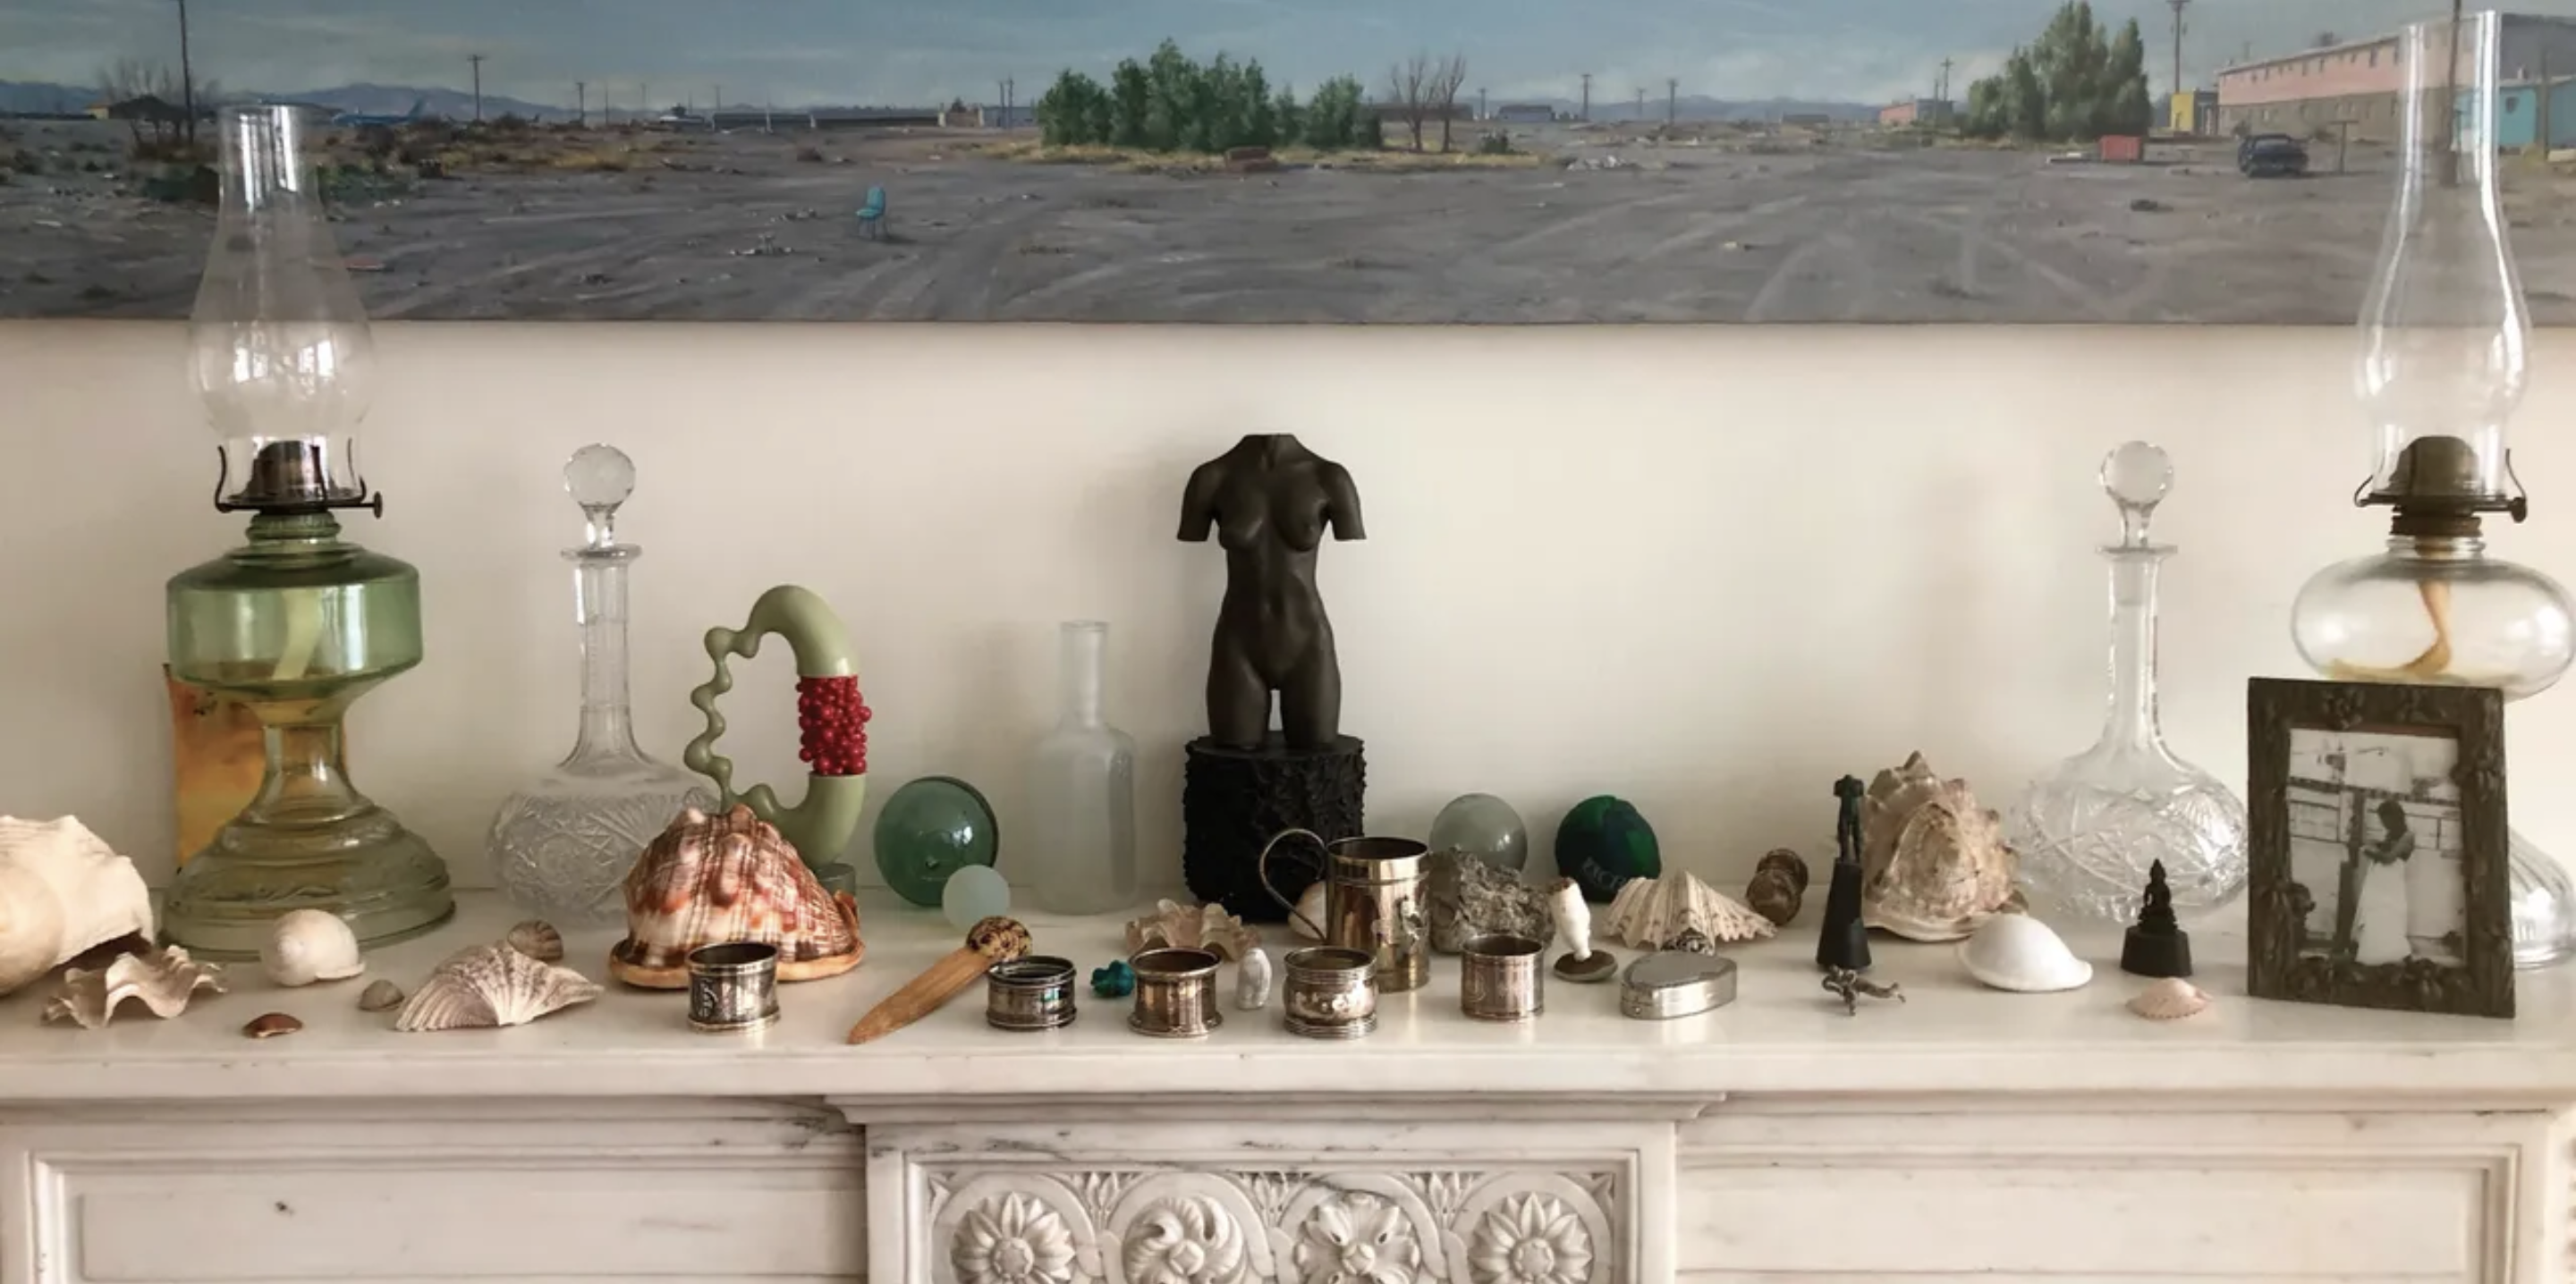 Several objects are placed on a marble fireplace: A small sculpture of a nude woman’s torso, seashells, lamps, metal cups, and glass carafes. A big painting depicting a landscape of a deserted parking lot with wide blue skies hangs above the fireplace.